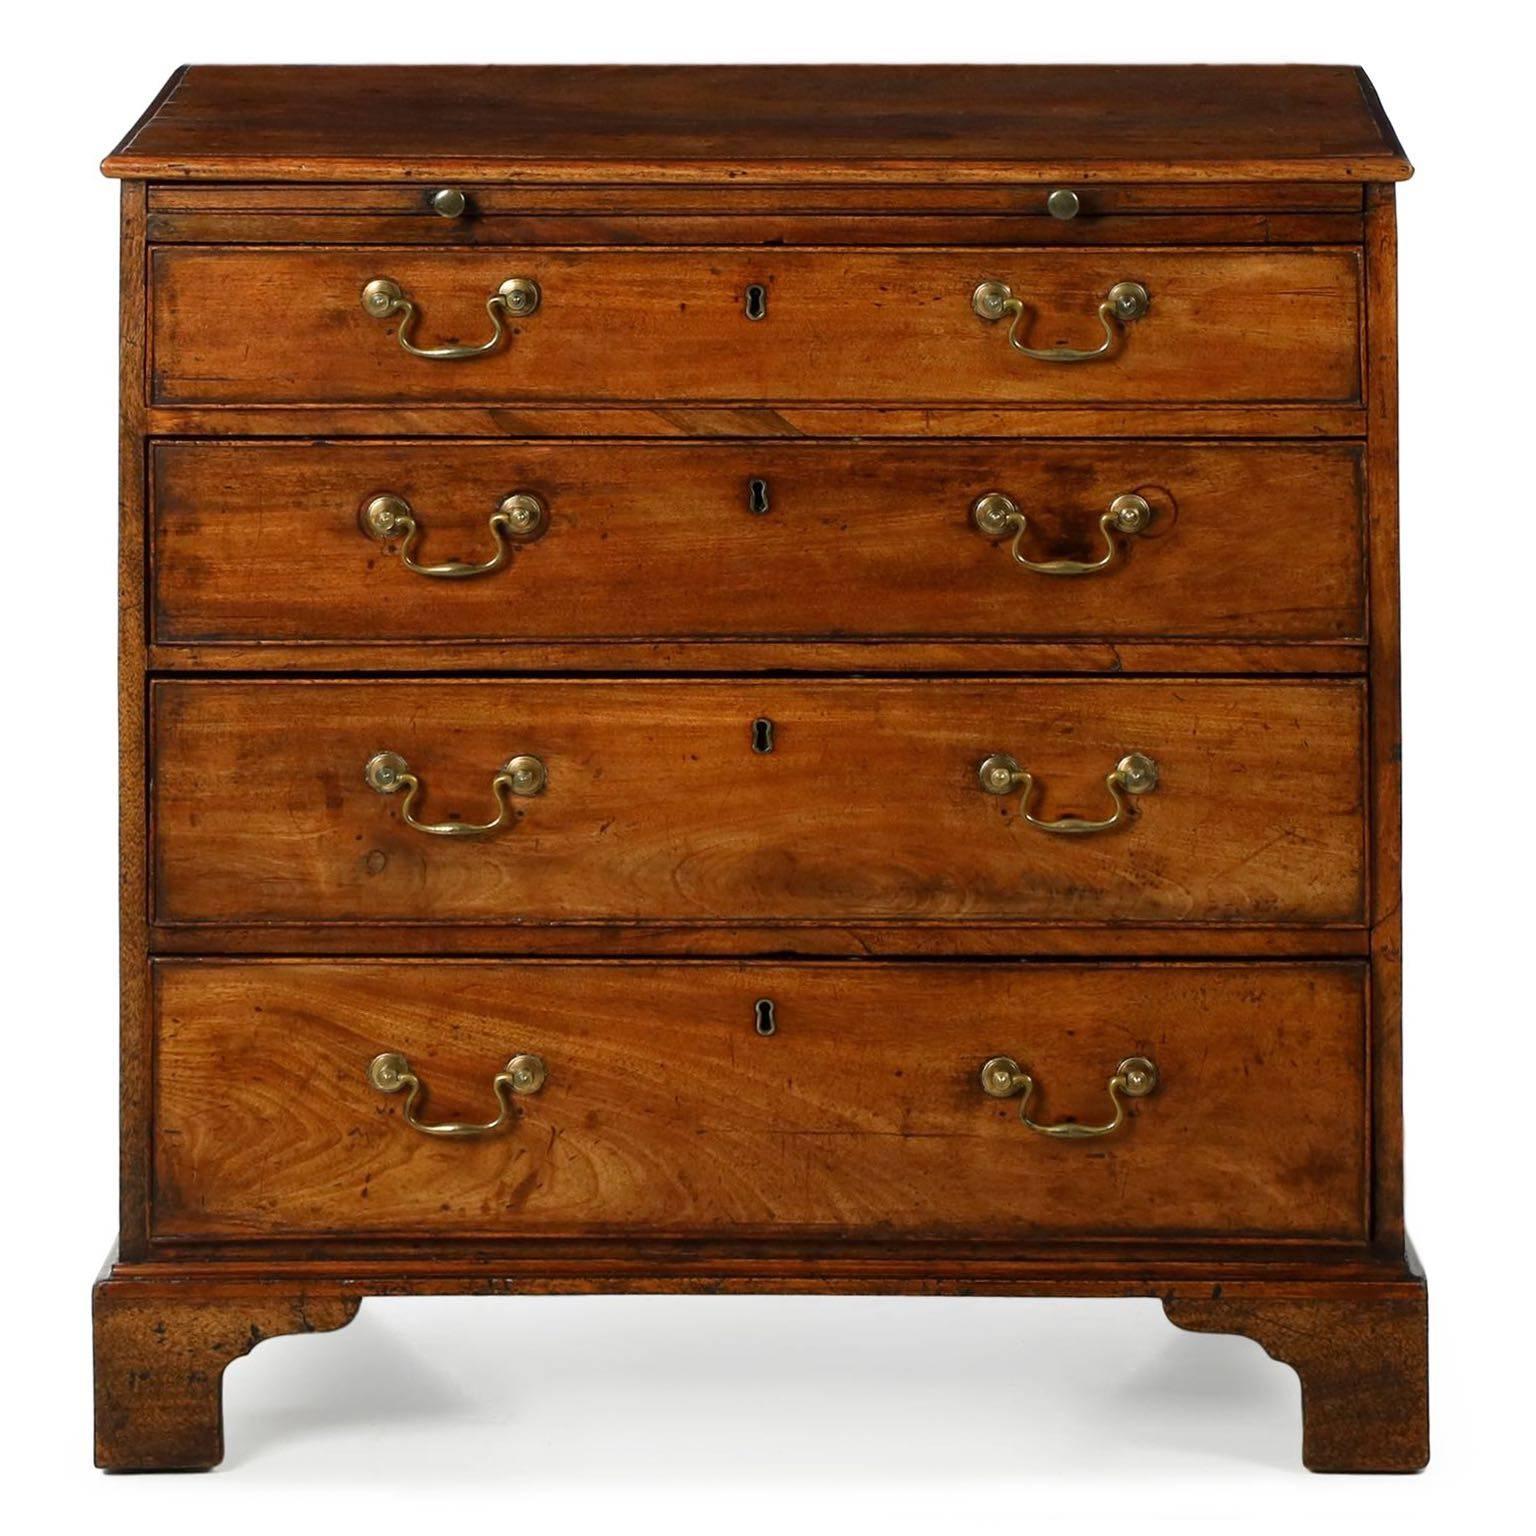 This chest of drawers is particularly attractive for it’s petite size, the diminutive form of case termed a “bachelor’s chest”. These are absolutely gorgeous bedside solutions, as the case is small enough that it does not dominate a wall or have